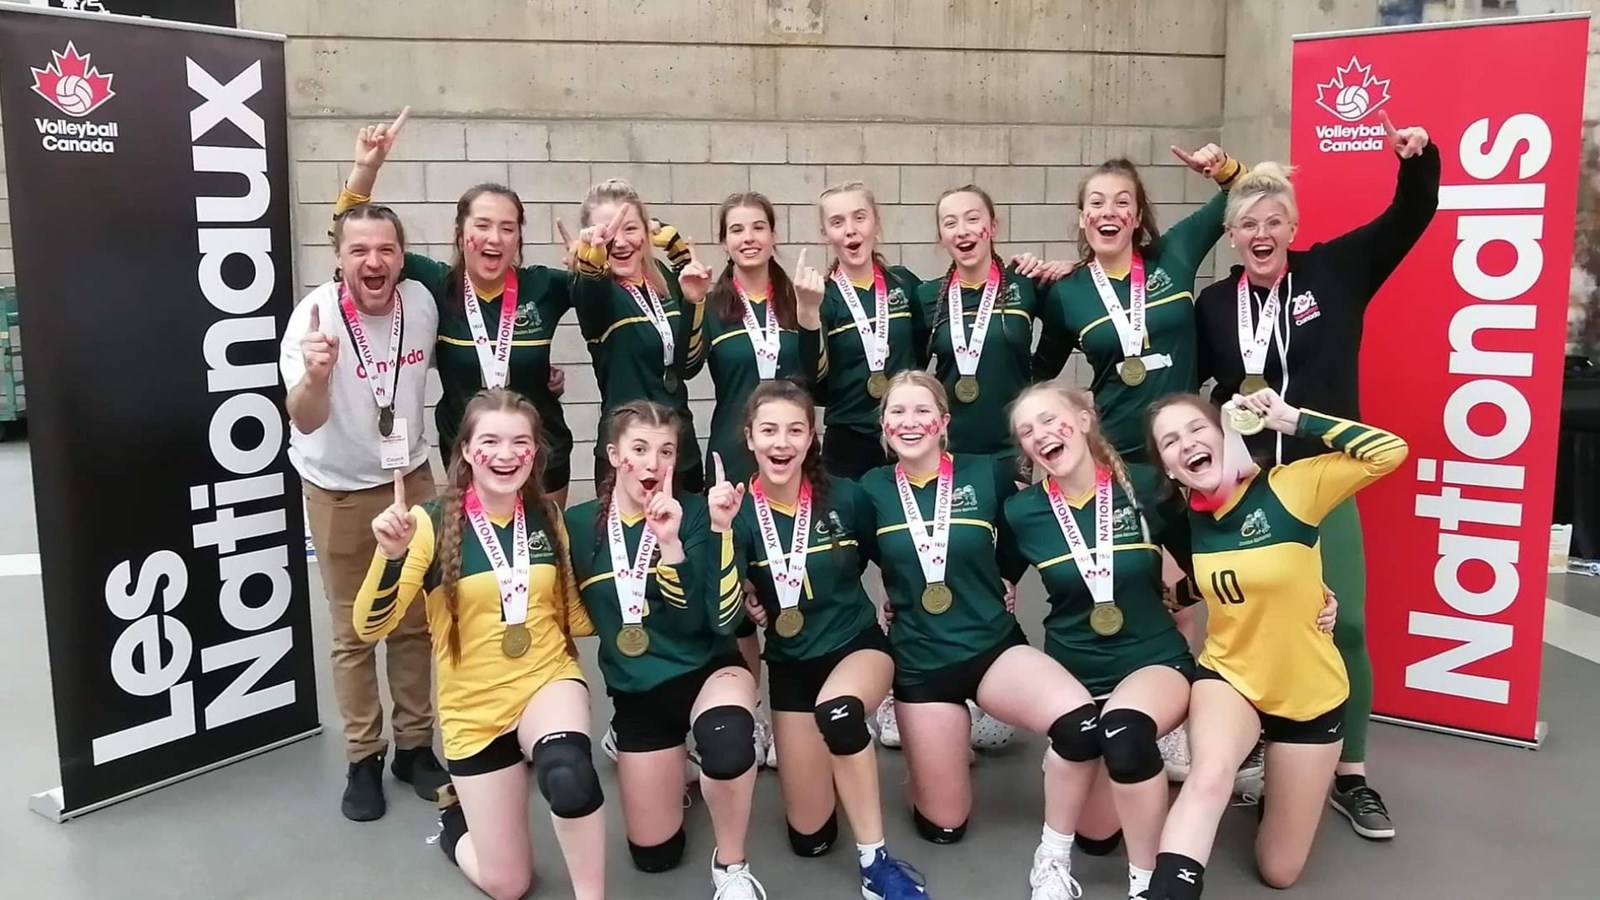 Volleyball féminin: les Condors championnes canadiennes